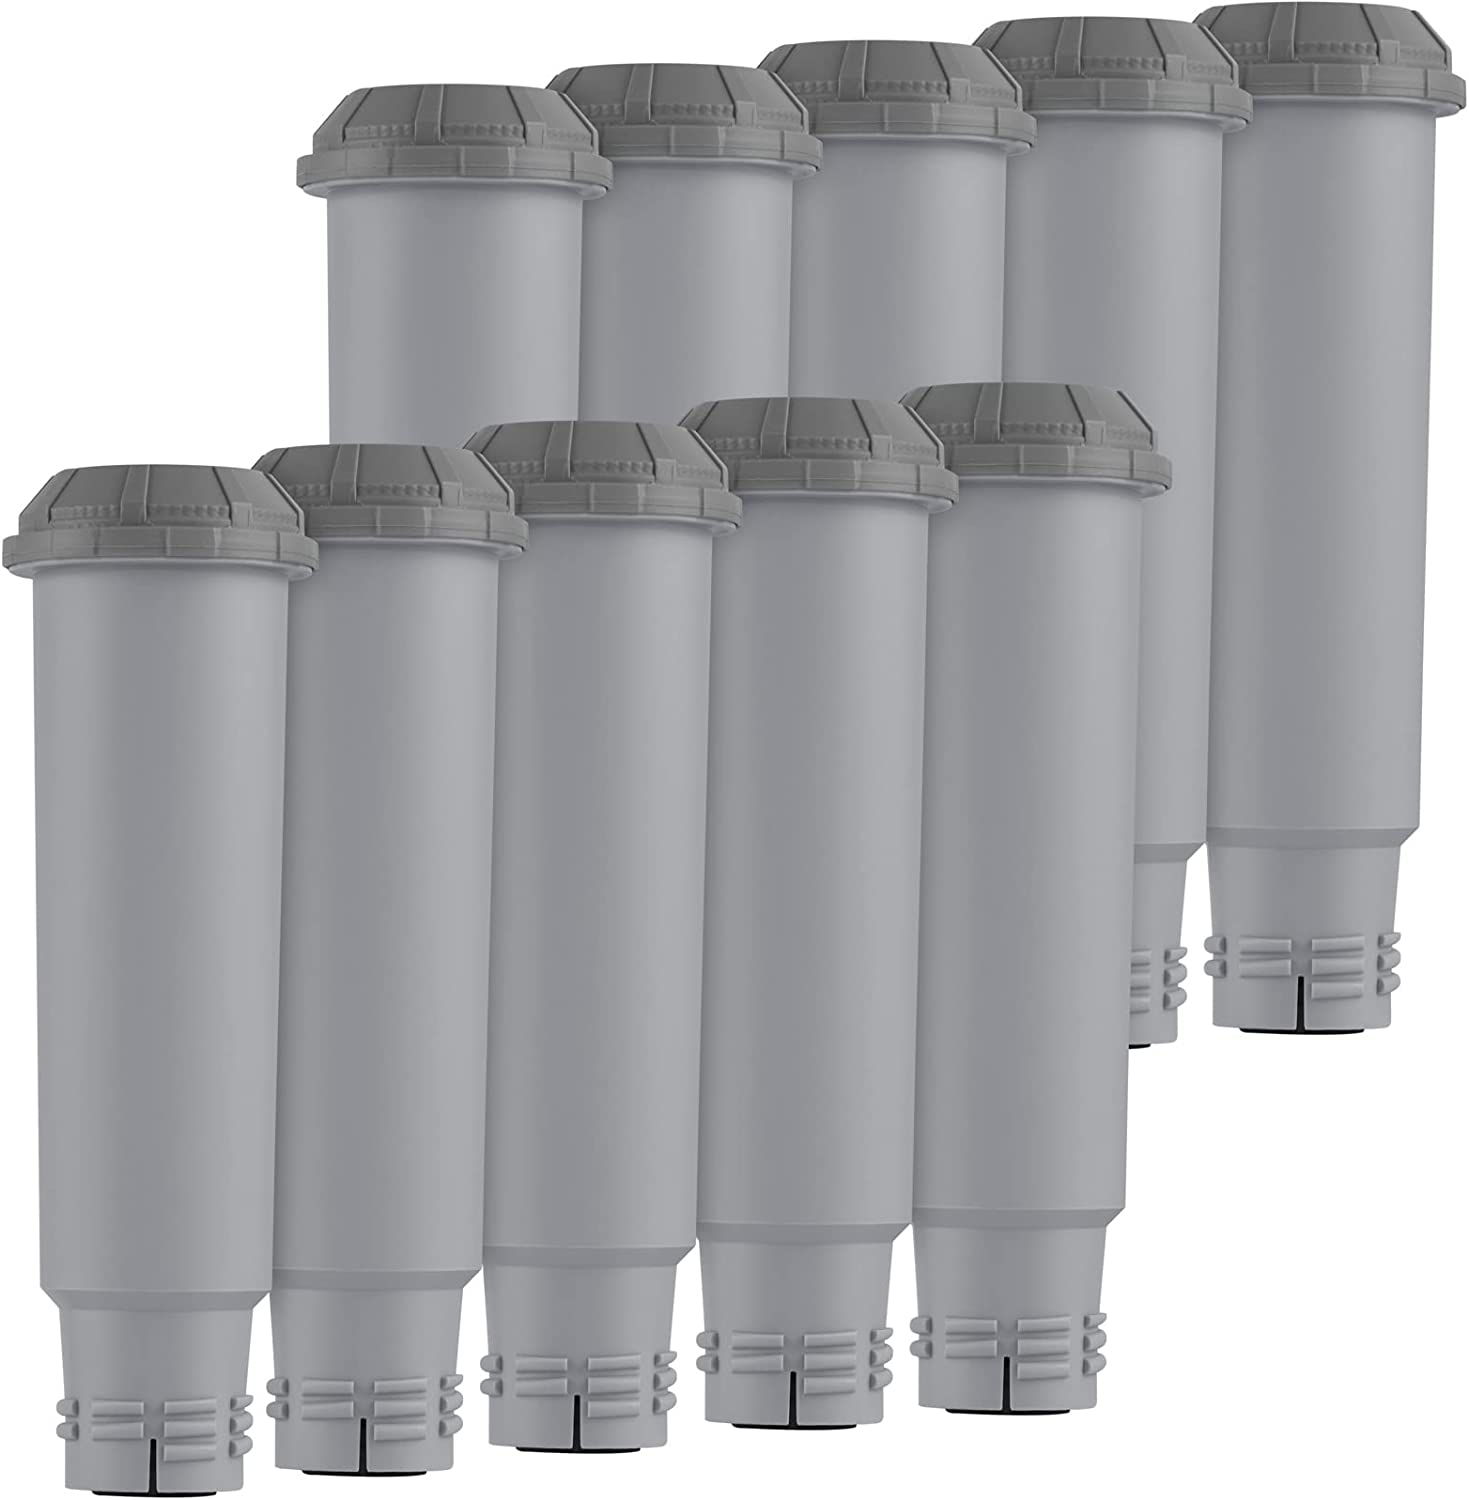 Violo 10 x filter cartridges as a compatible replacement for KRUPS F088 for the commercially available coffee machines and fully automatic coffee machines from Krups, Bosch or Siemens